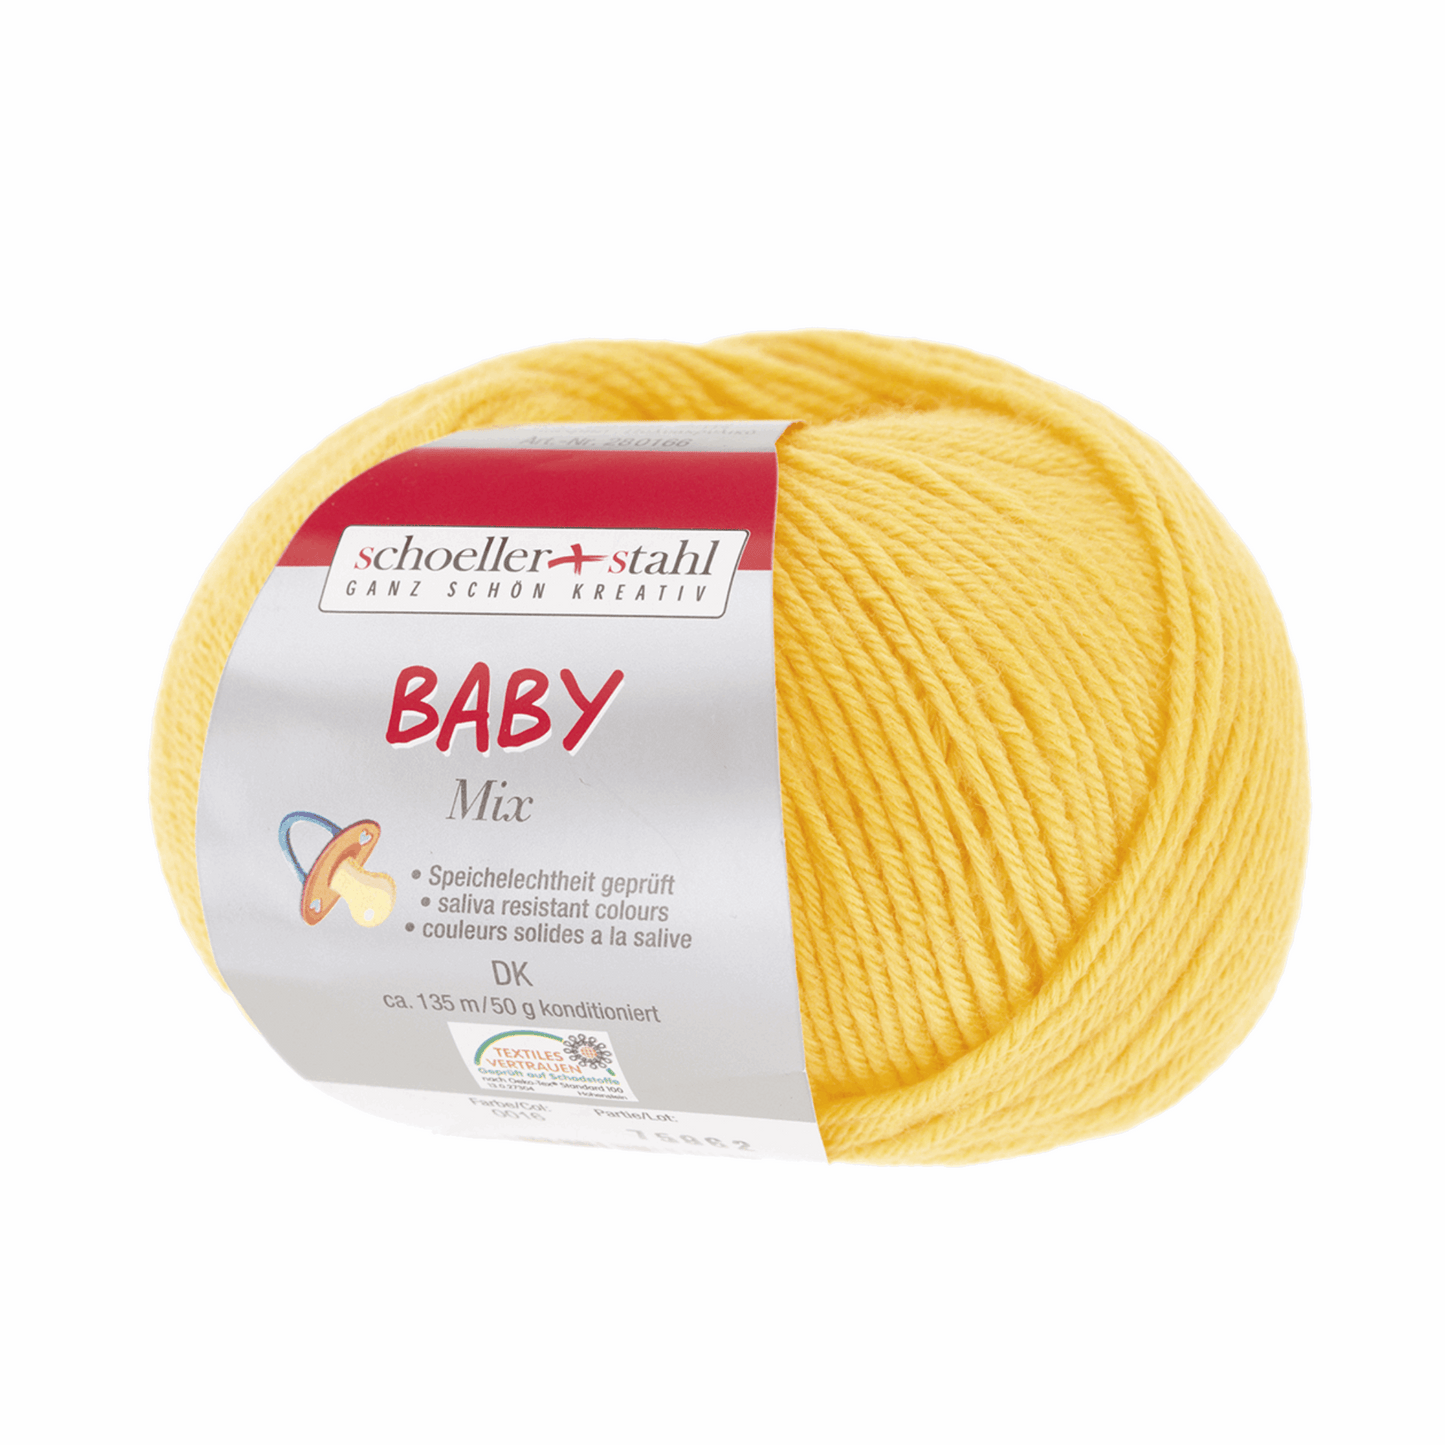 Baby mix 50g, 90166, Farbe 16, gelb